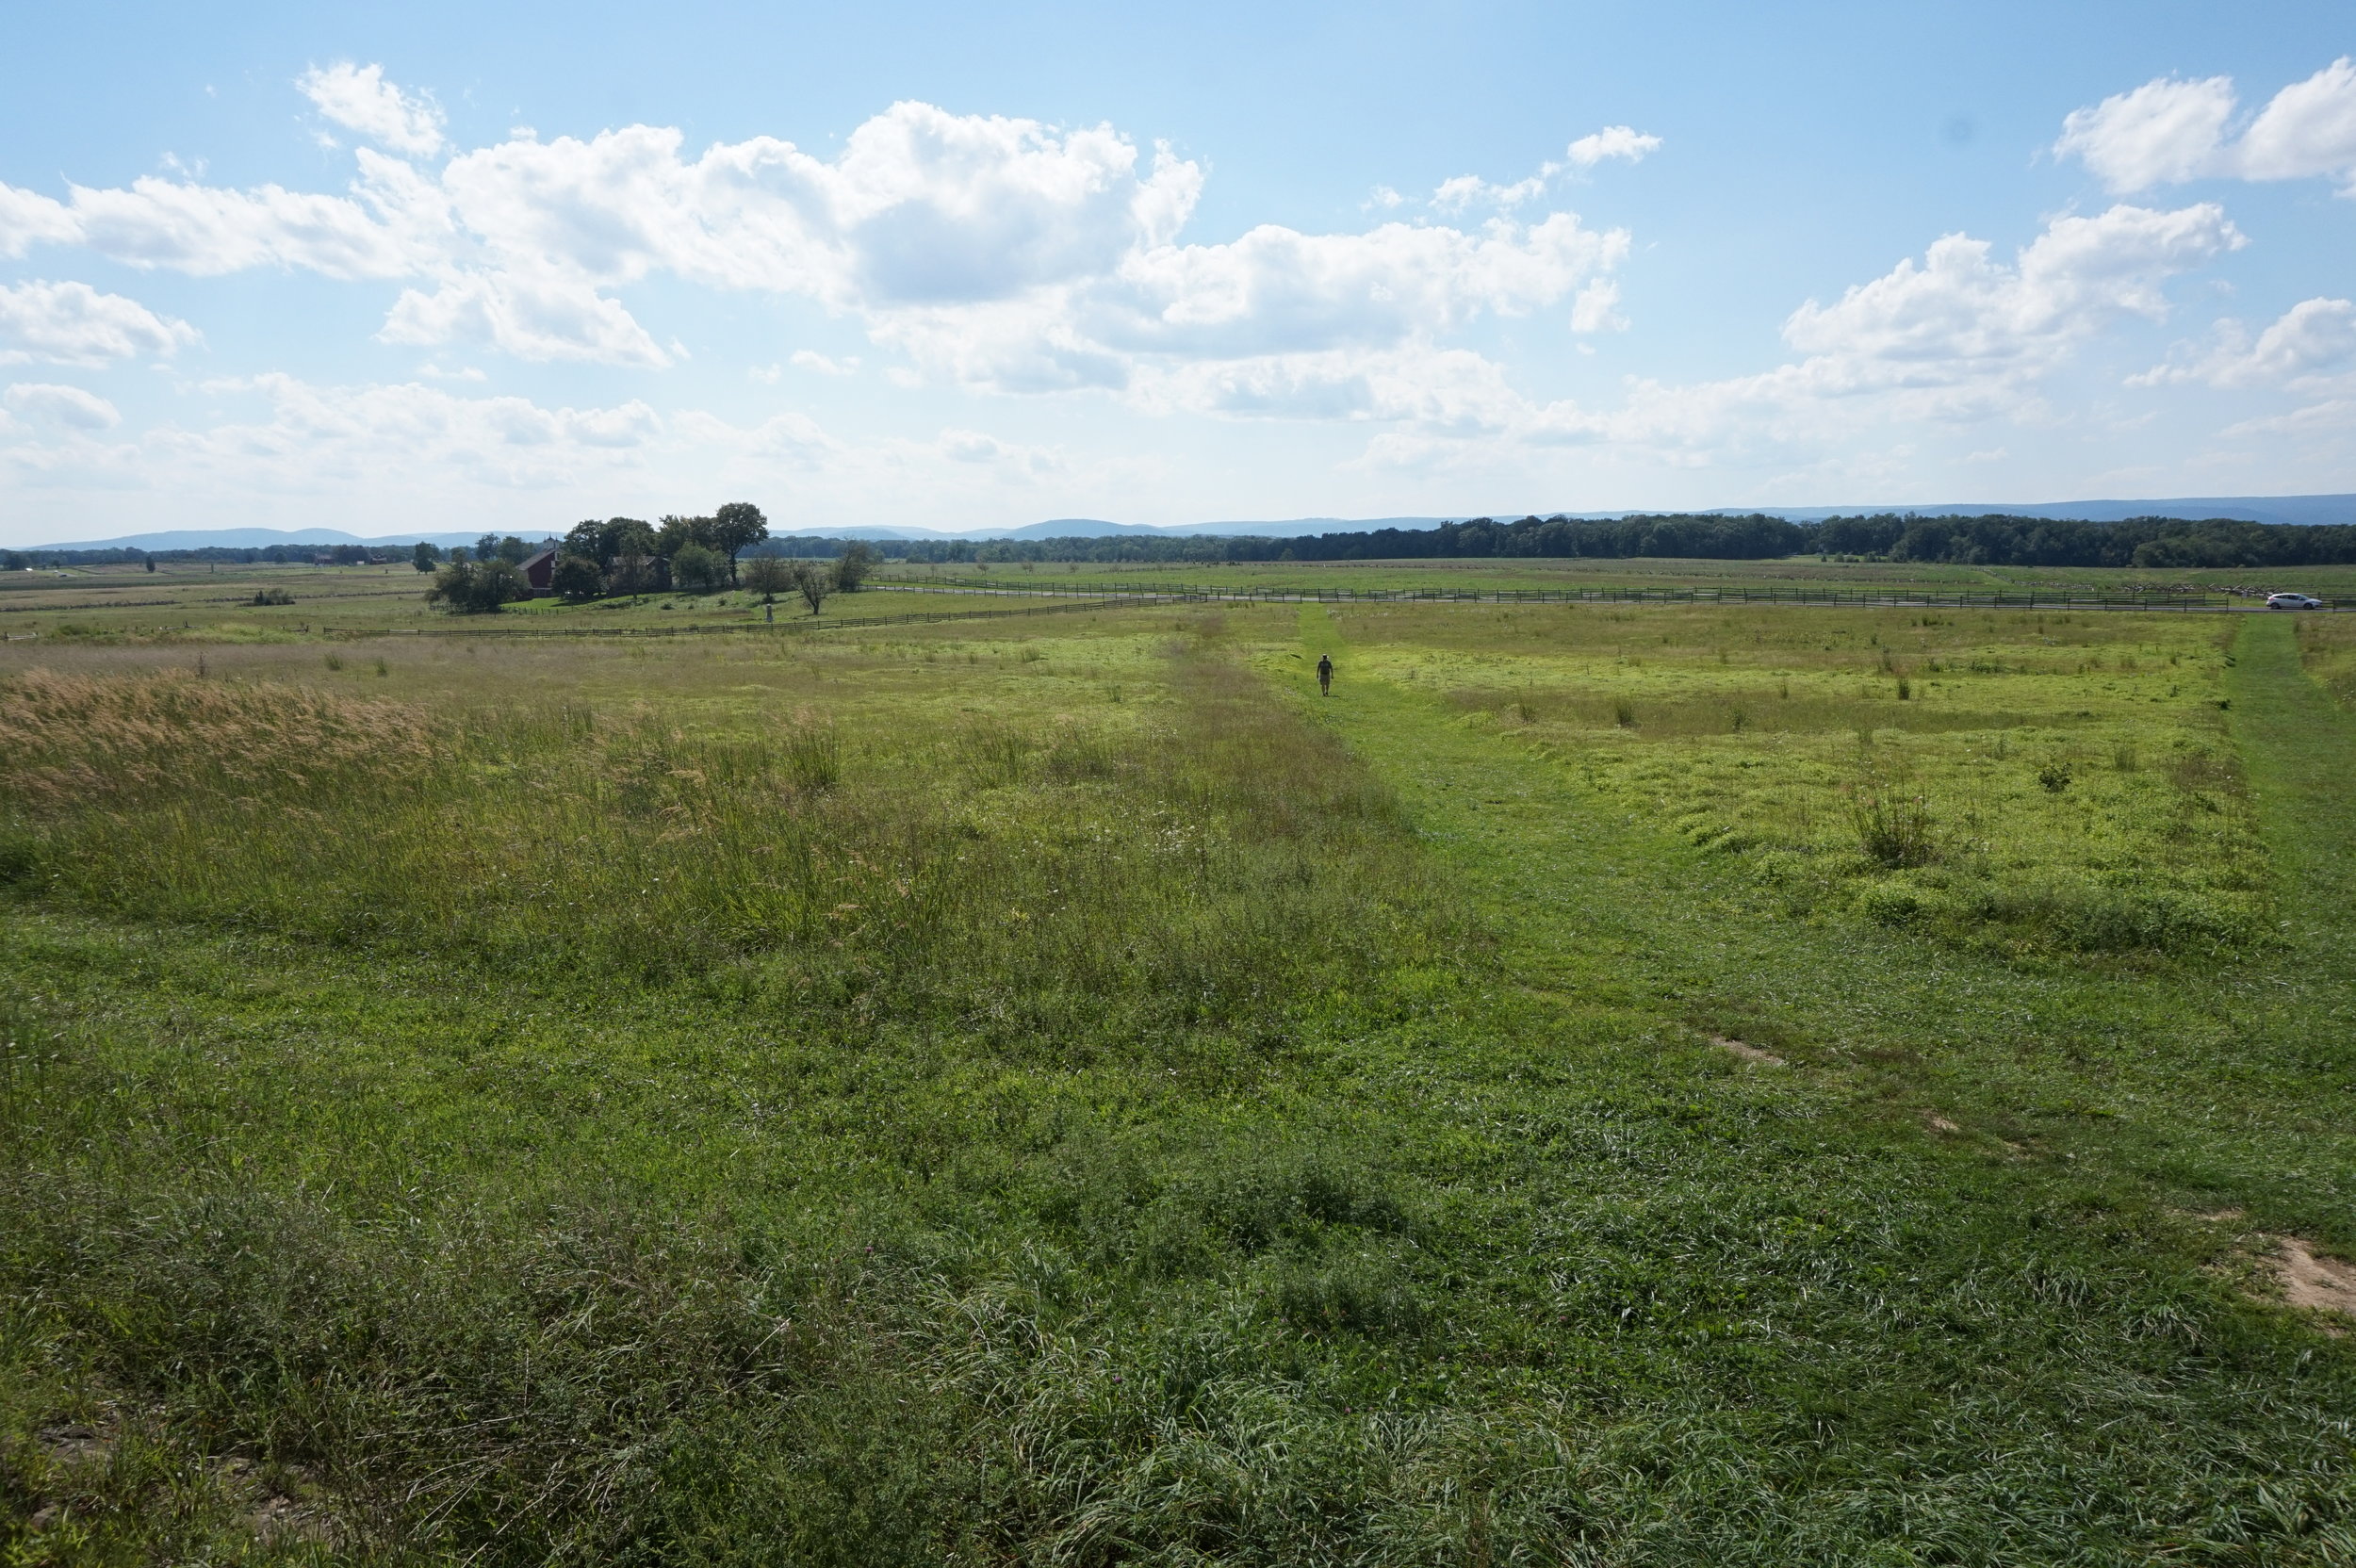  The open field crossed by 12,500 Confederate soldiers during Pickett's Charge. 